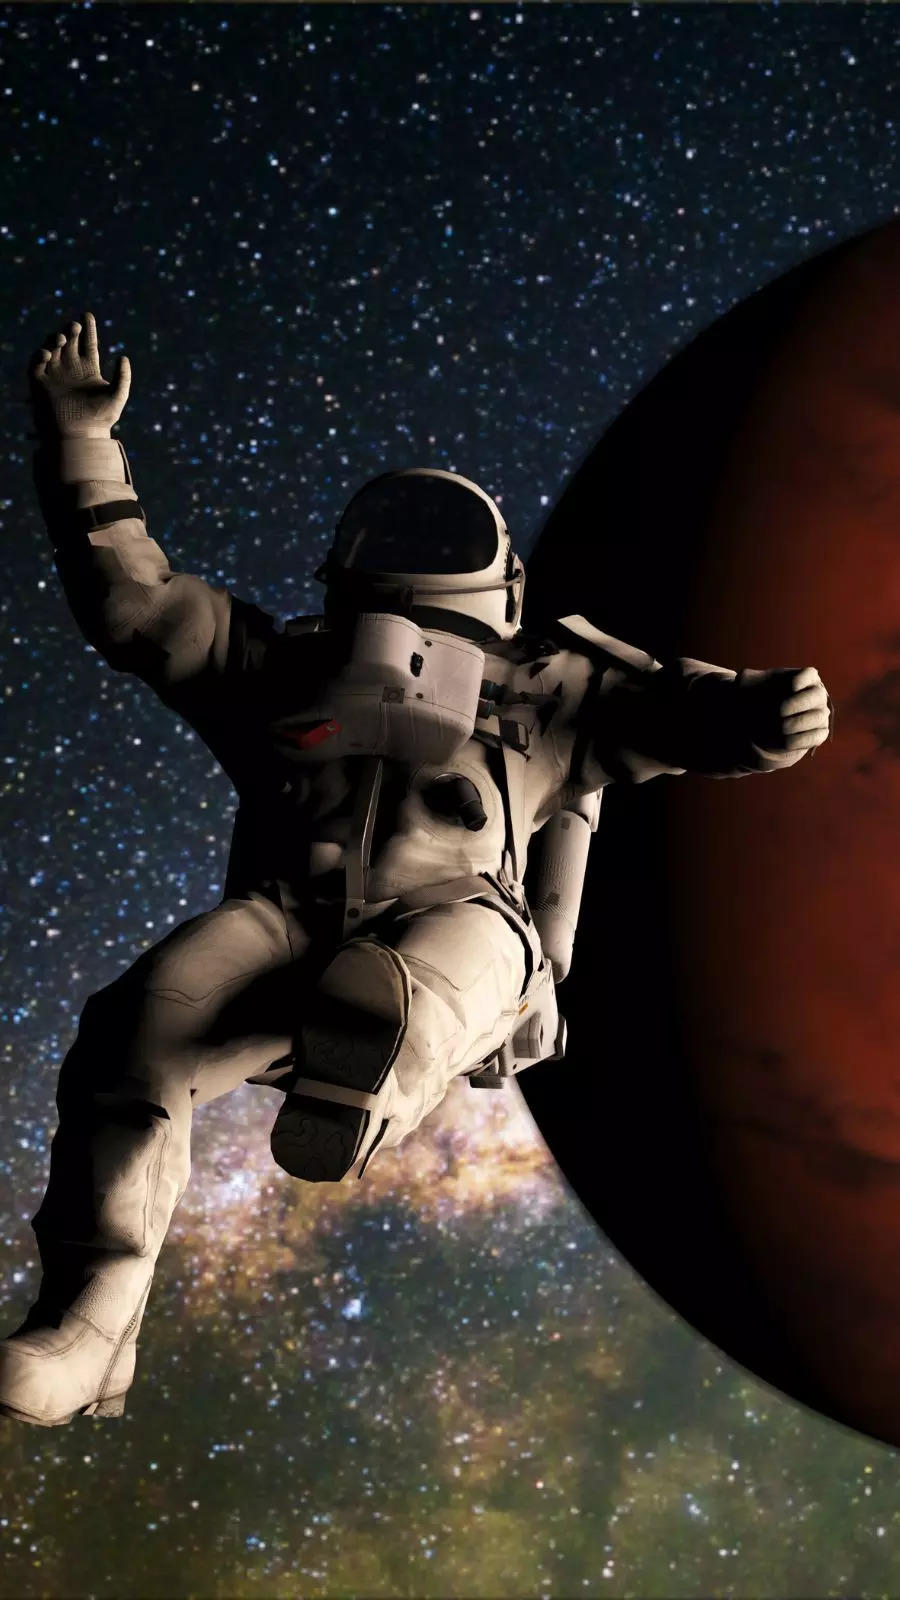 If Someone Dies In Space, What Happens To The Body? NASA Protocol Says